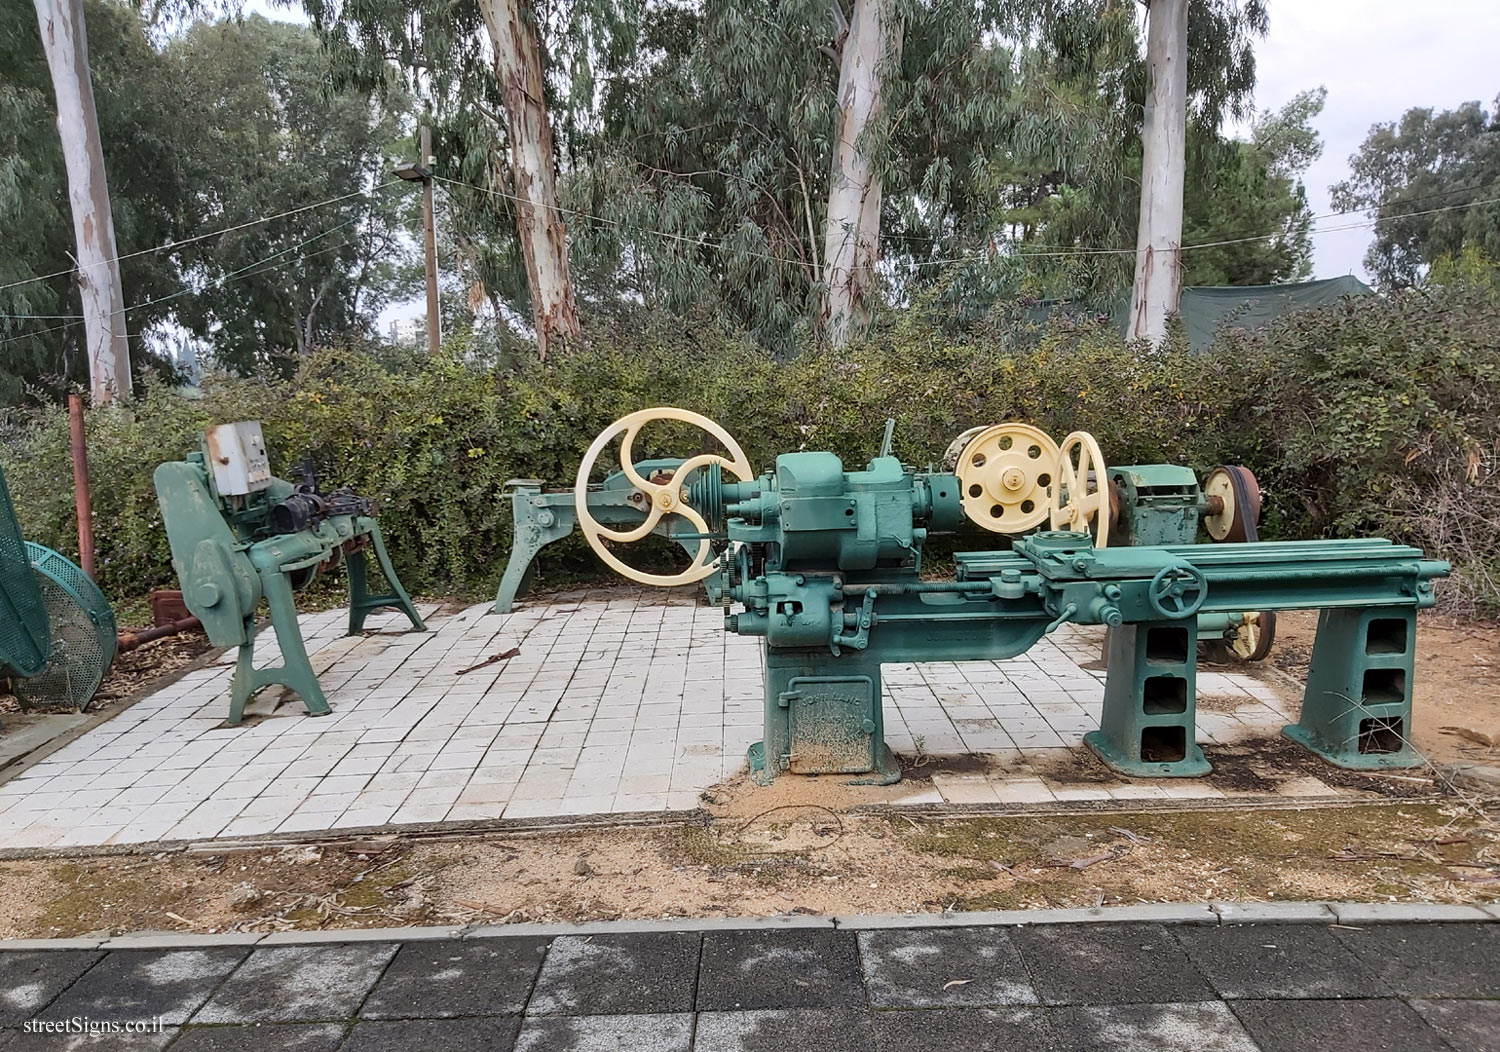 Rehovot - Heritage Sites in Israel - Ayalon Institute - The machines for making weapons - David Fikes St 1, Rehovot, Israel